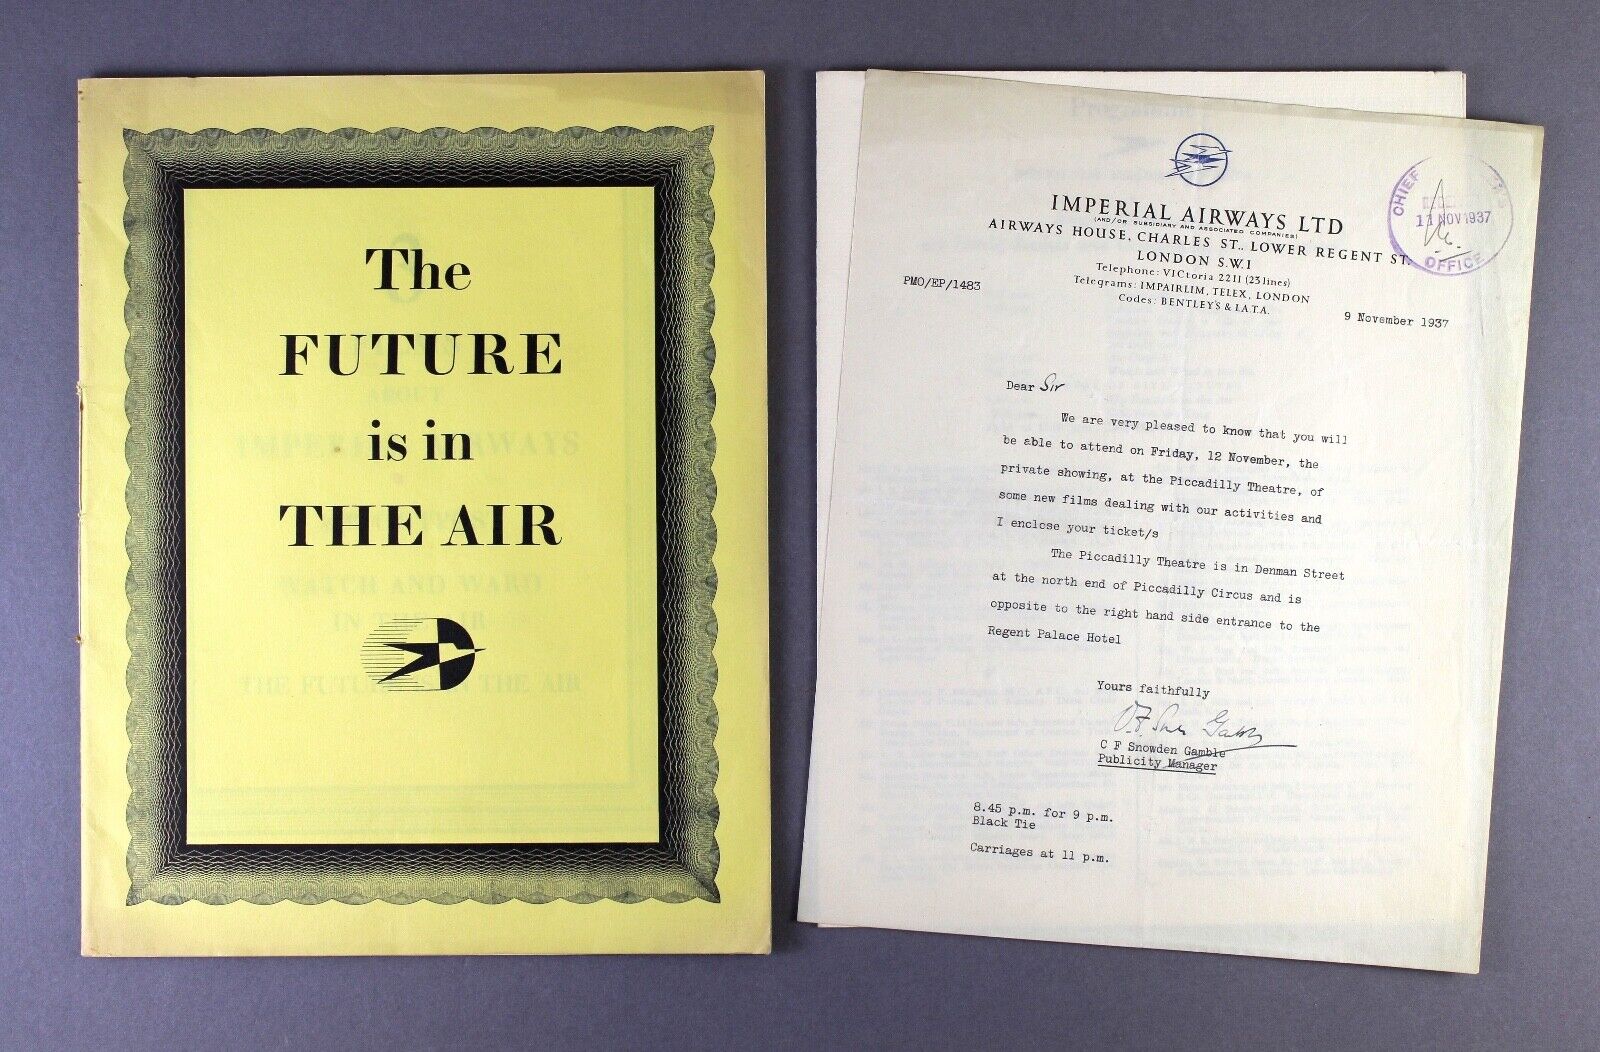 IMPERIAL AIRWAYS THE FUTURE IS IN THE AIR FILMS BROCHURE & PROGRAMME & LETTER